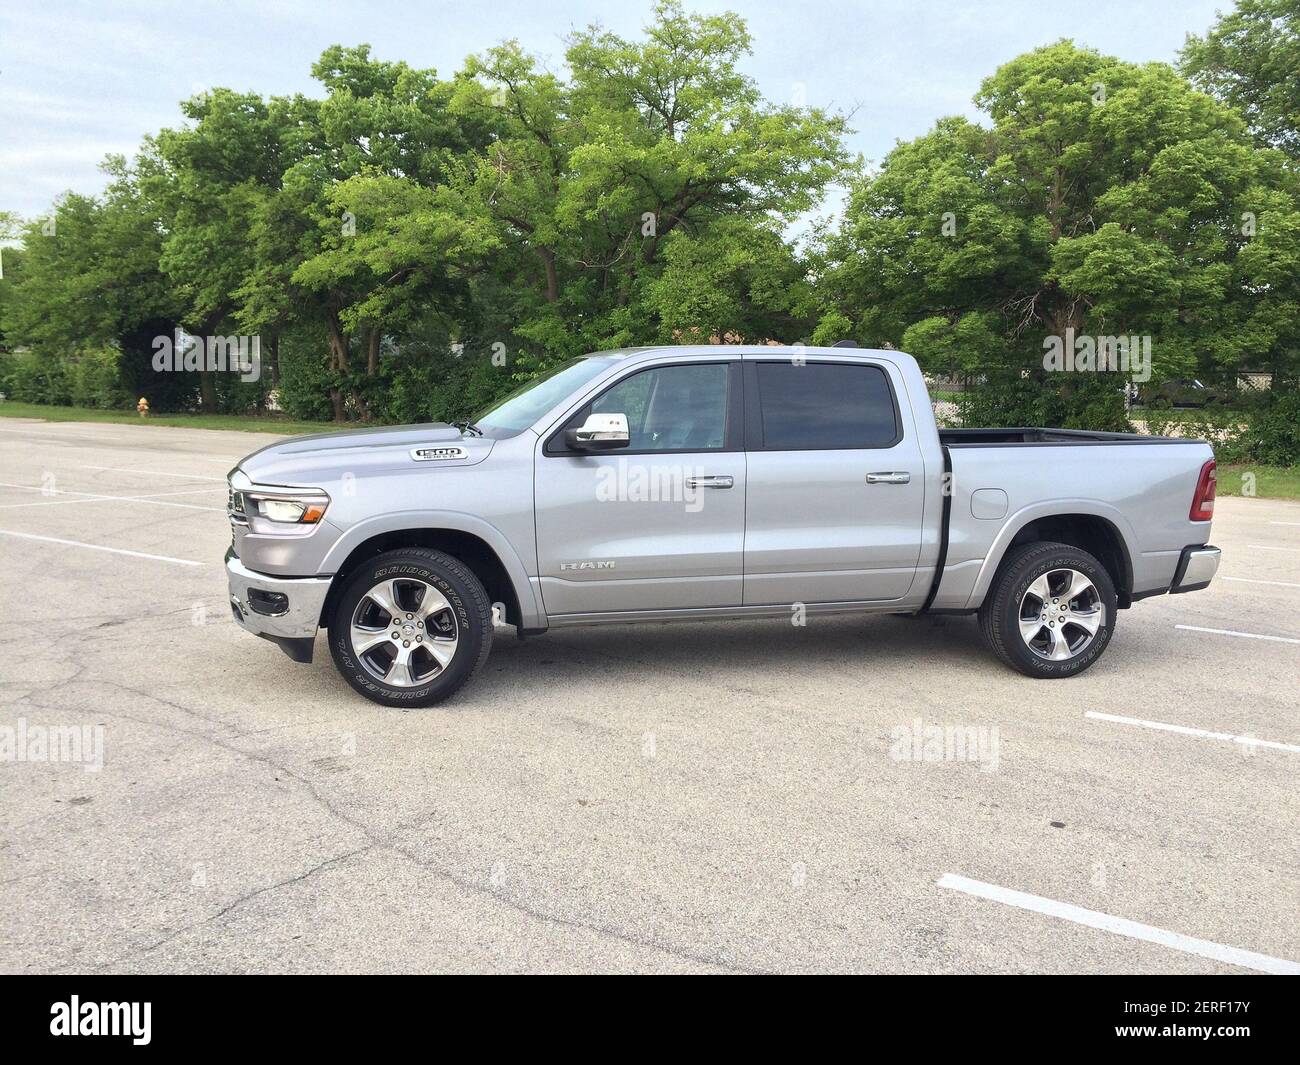 The redesigned 2019 Ram 1500 Crew Cab 4x4 in Laramie trim is powered by a  395-horsepower, 5.7-liter Hemi V-8 engine with an eight-speed transmission.  It rides as quiet as an SUV, is